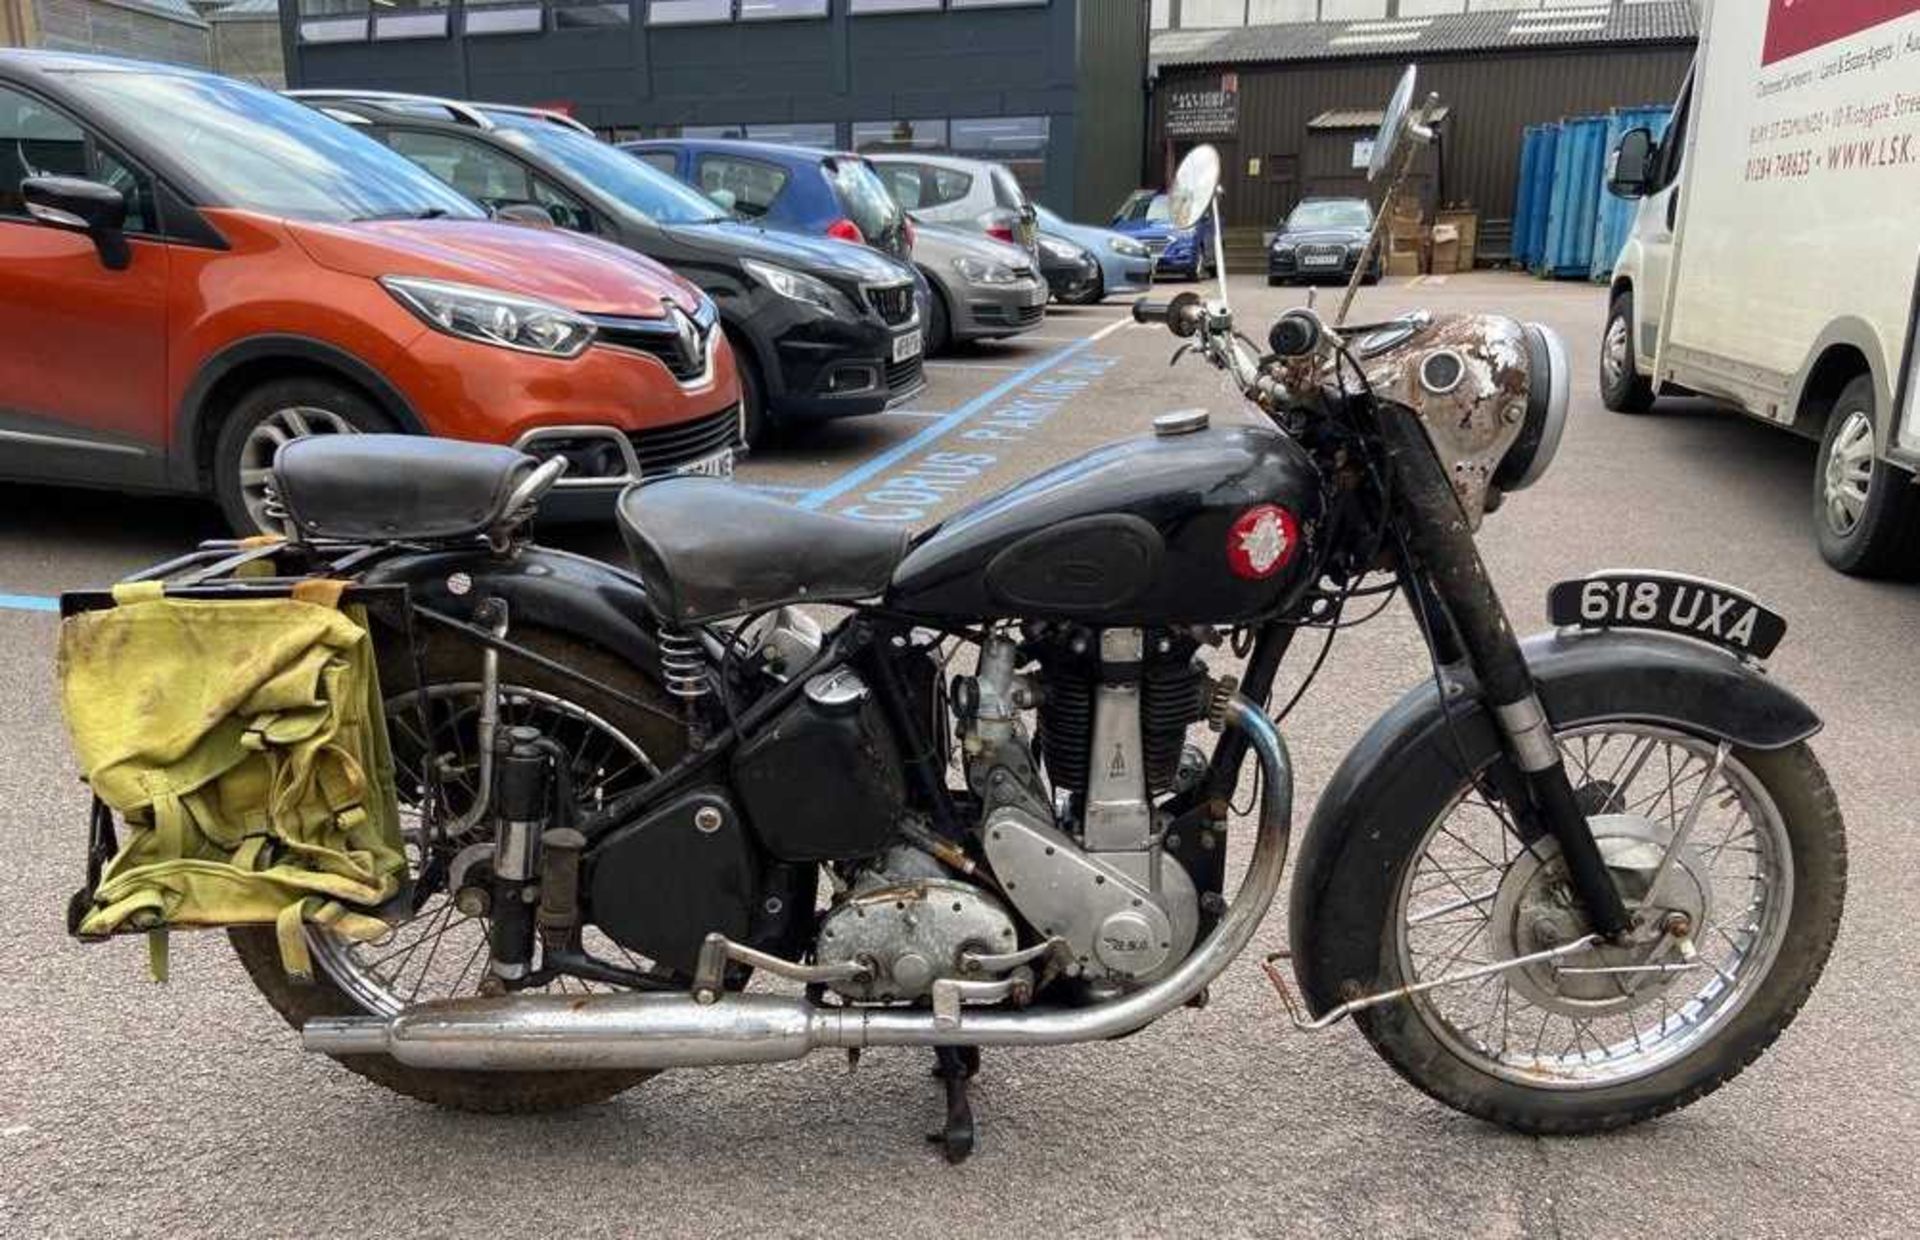 1954 BSA M33 Motorcycle 500cc Non-transferrable age commensurate number plate verified by Roy